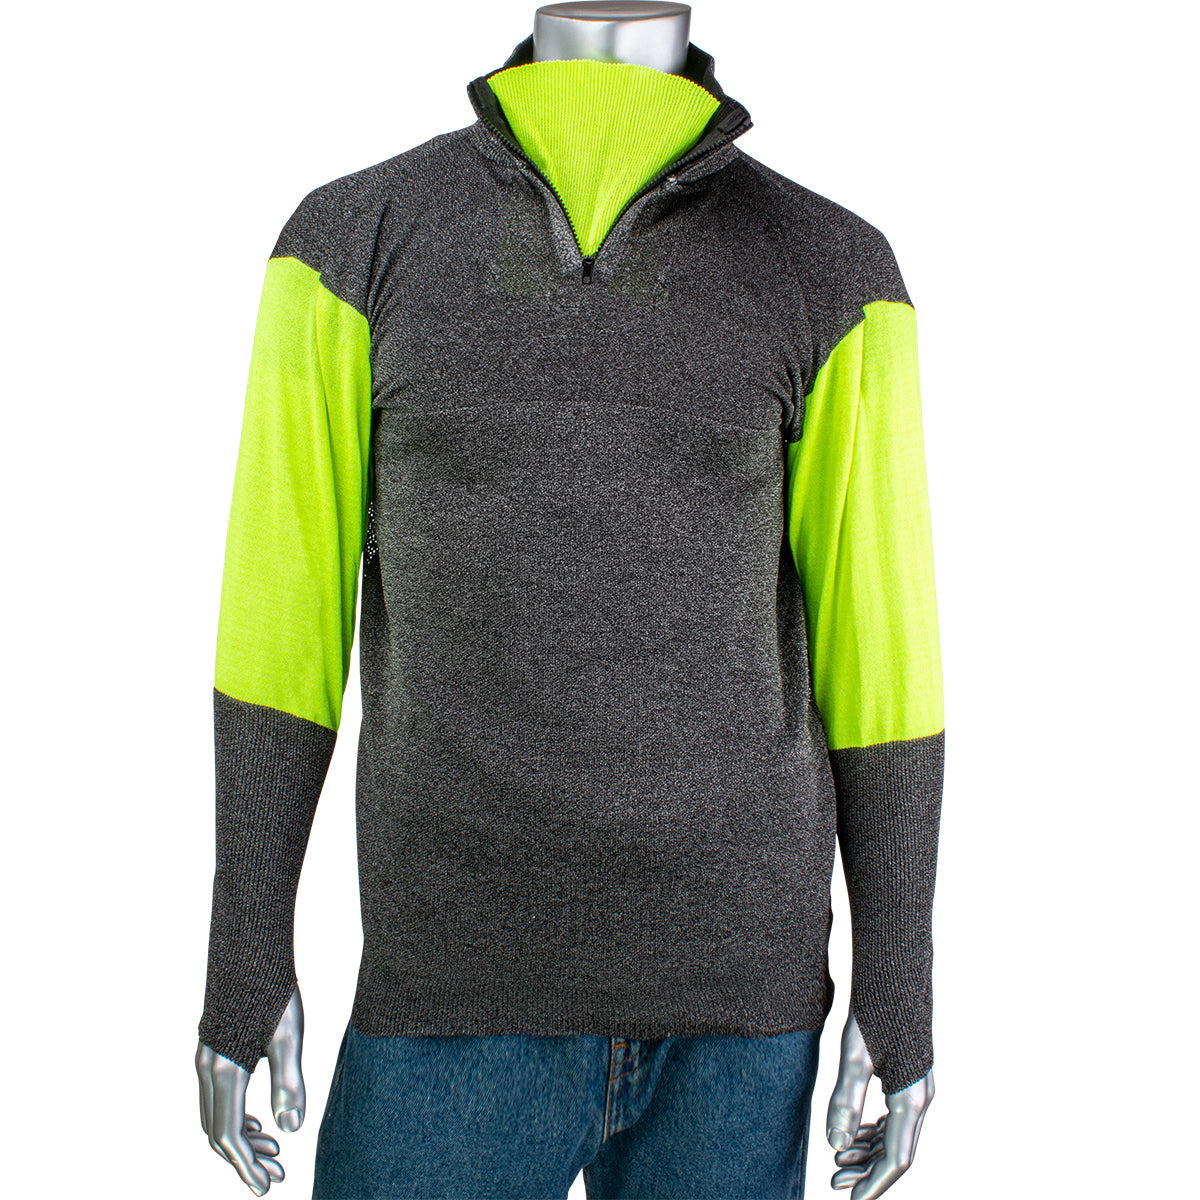 PIP PJG145-3CM-HVB-TH-2XL ATA Blended Cut Resistant 1/4 Zip Pullover with Hi-Vis Sleeves and Thumb Holes